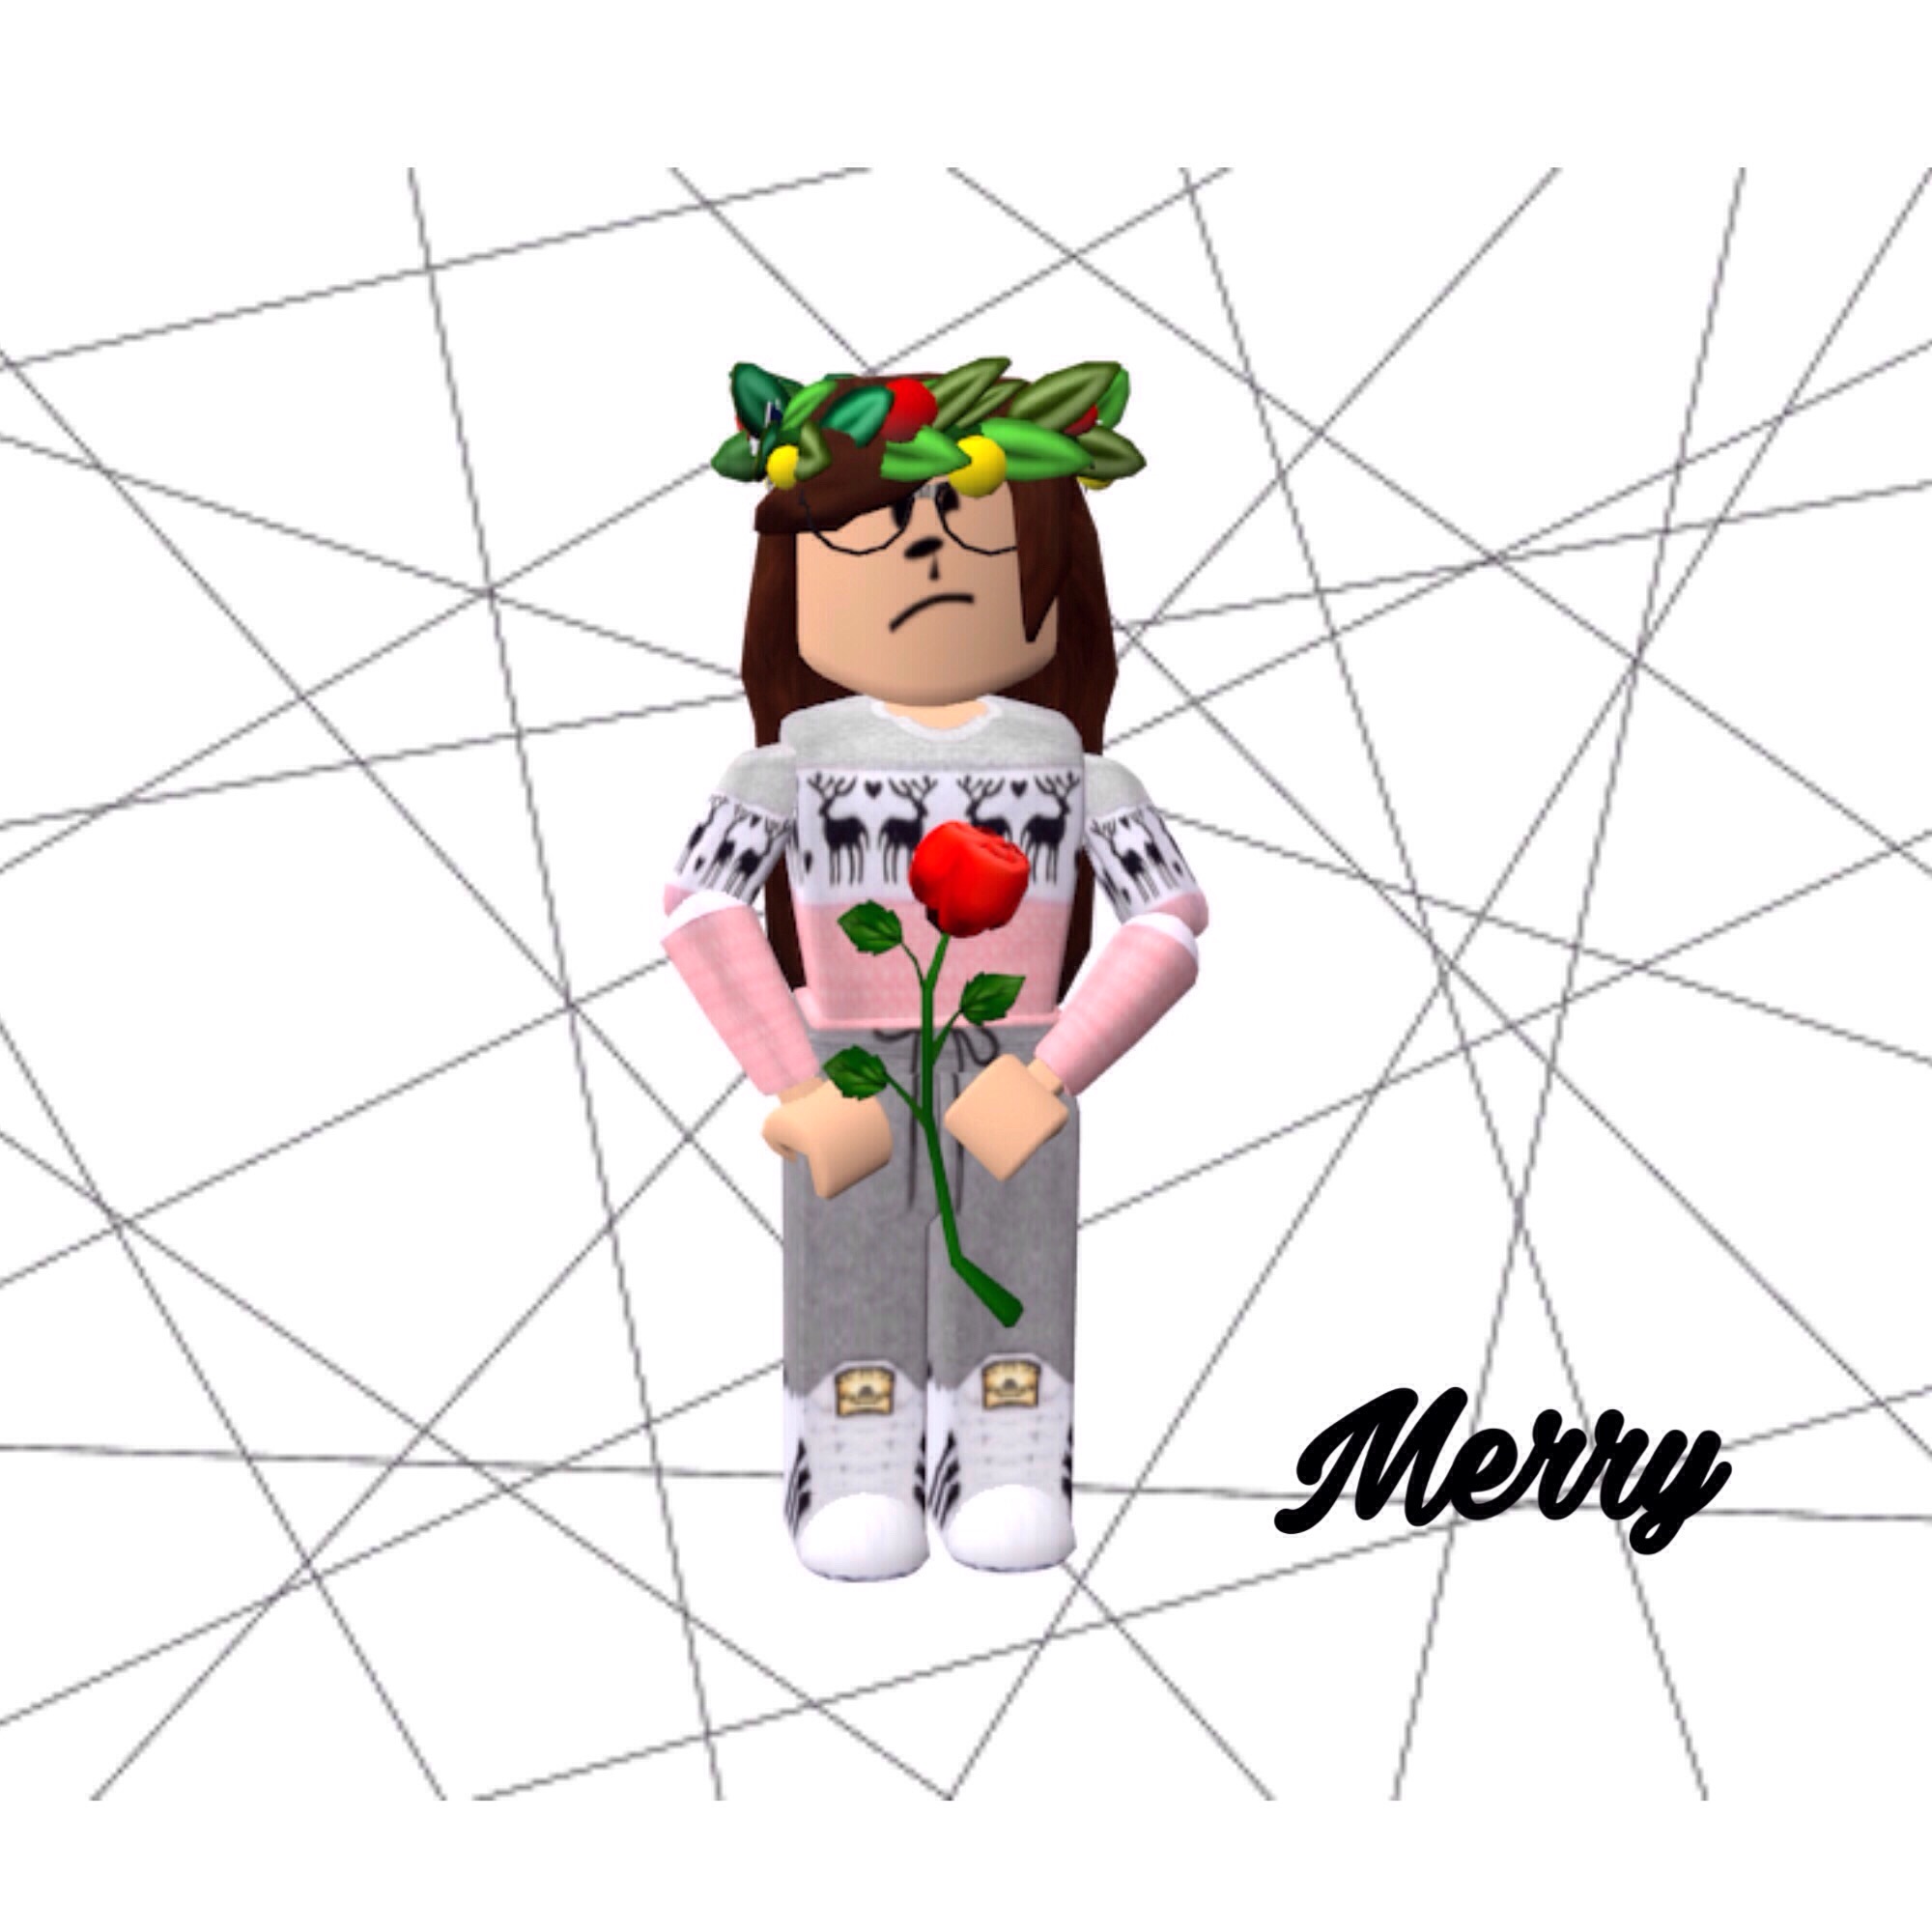 Roblox Robloxgfx Gfx Blender Image By Merry - roblox blender animation